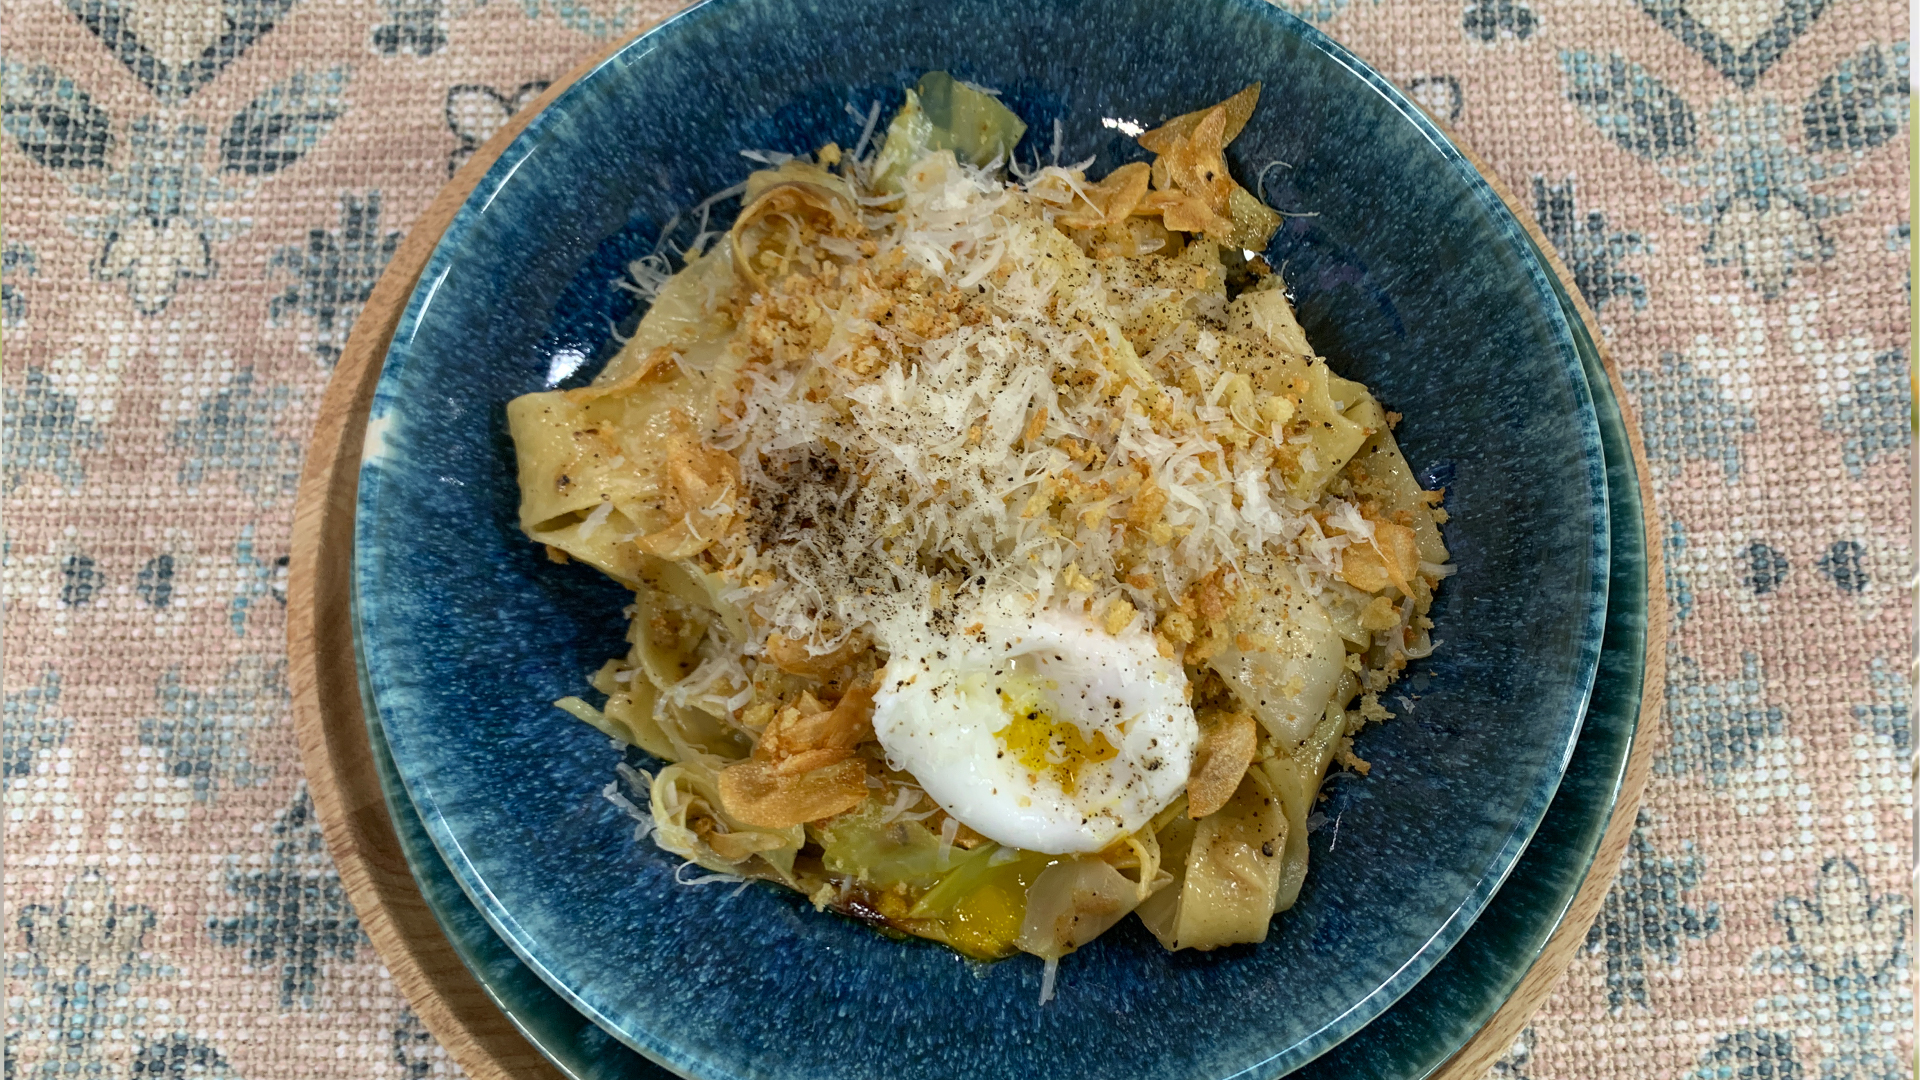 Pappardelle with cabbage, crumbs and crispy garlic